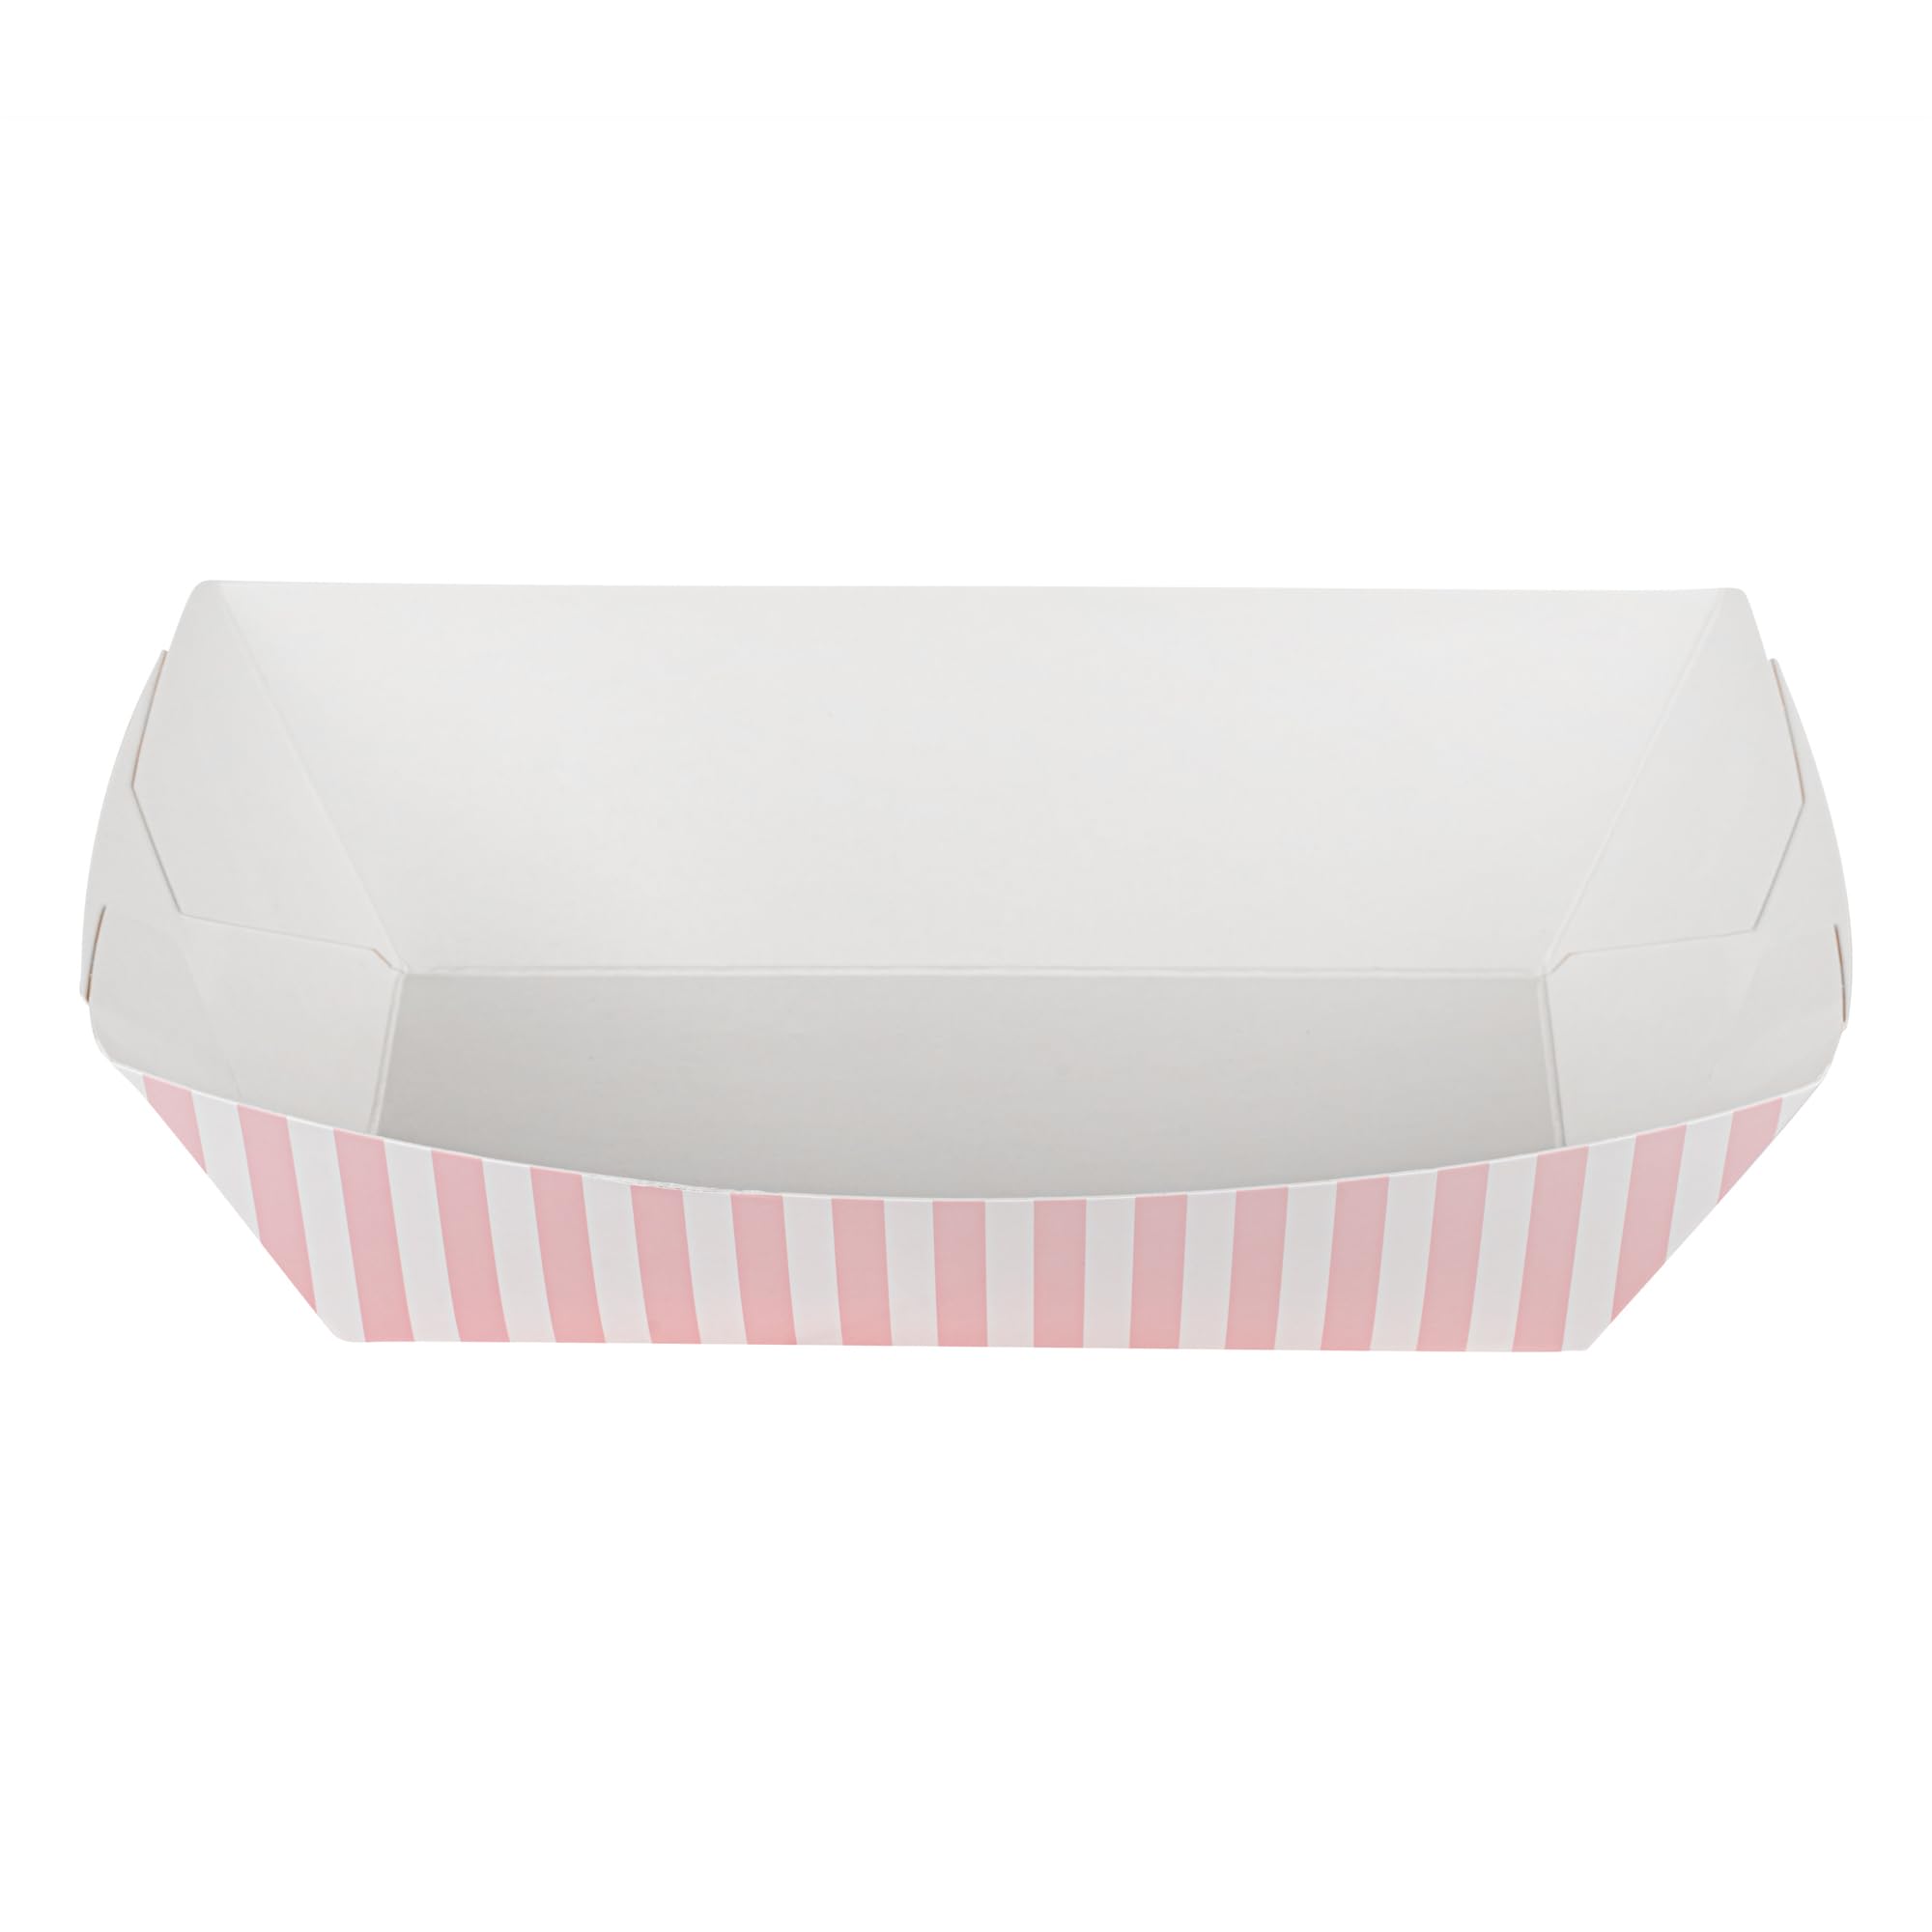 Bio Tek 2 Pound Food Boats, 200 Disposable Paper Food Trays - Heavy-Duty, Greaseproof, Pink And White Paper Boats, For Snacks, Appetizers, Or Treats, Use At Parties Or Carnivals - Restaurantware